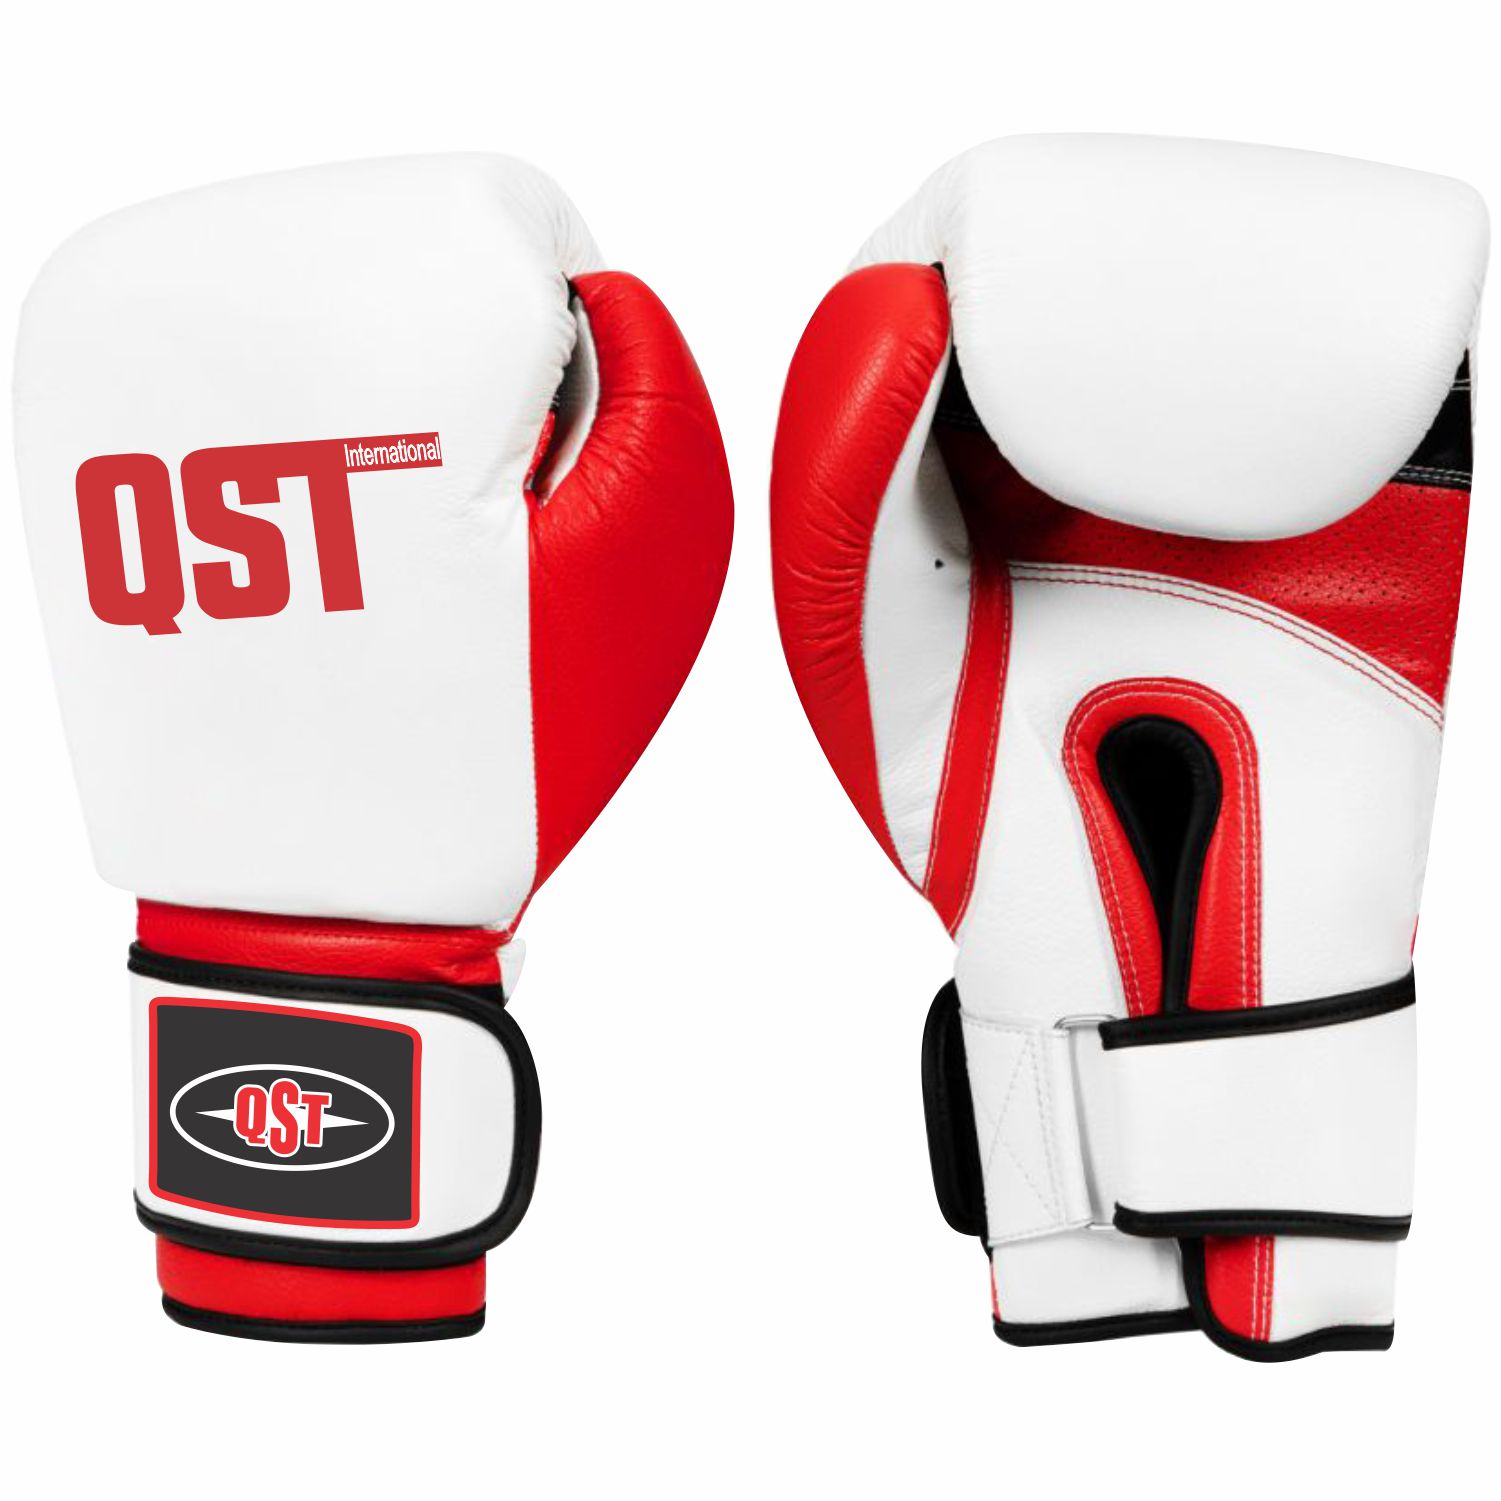 Professional Boxing Gloves - PRG-1526